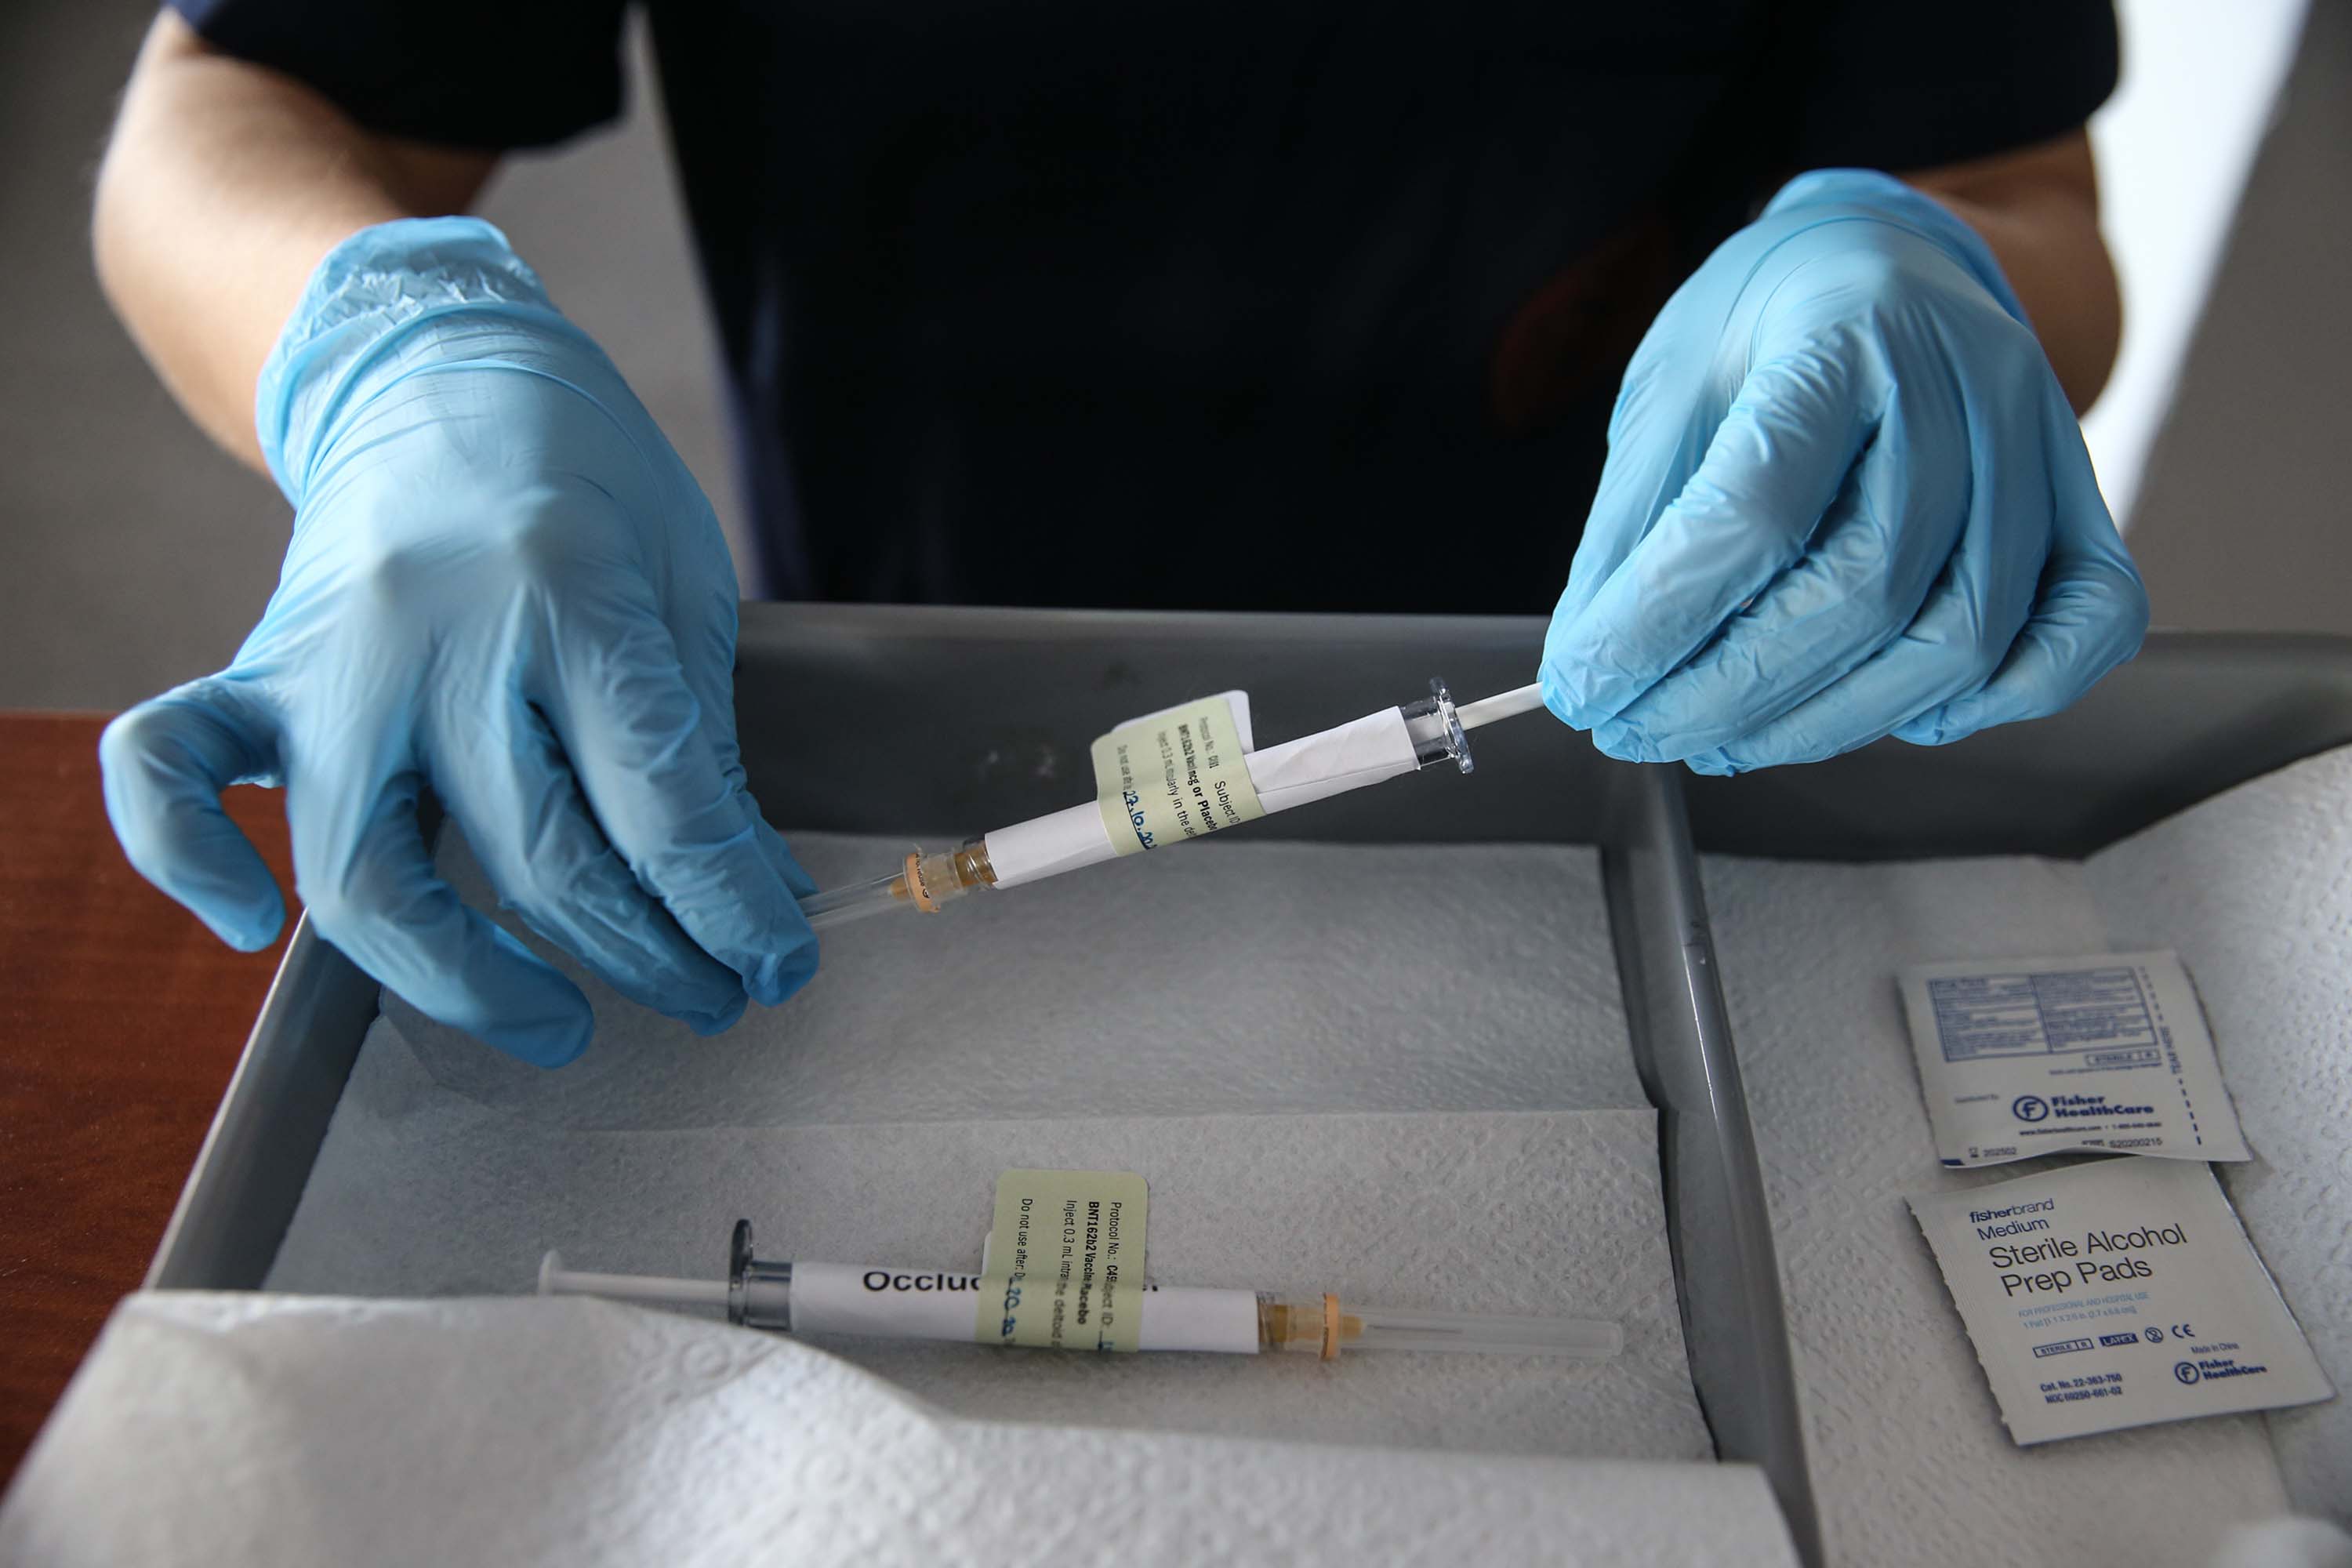 A health care worker holds an injection syringe of the phase 3 vaccine trial, developed against the novel coronavirus pandemic by the American drugmaker, Pfizer, and German company BioNTech, at the Ankara University Ibni Sina Hospital in Ankara, Turkey on October 27.